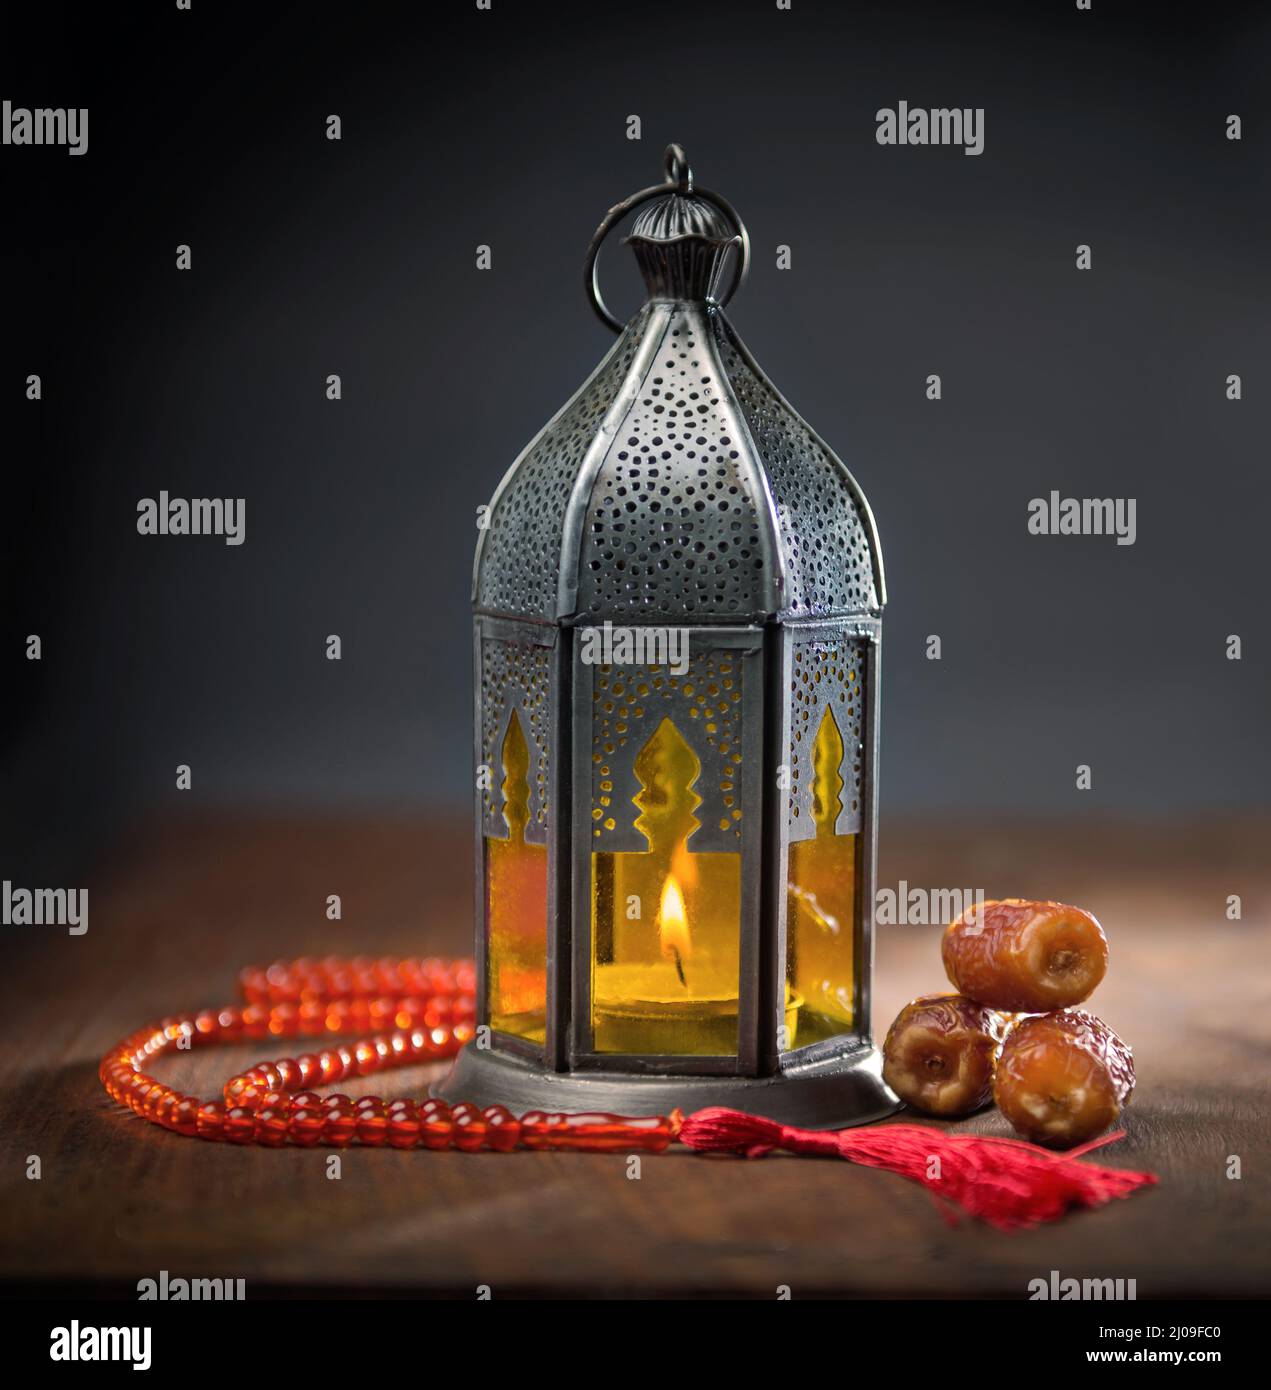 https://c8.alamy.com/comp/2J09FC0/ramadan-lantern-dates-and-rosary-still-life-traditional-egyptian-ramadan-lamp-with-dates-islamic-religious-objects-and-background-2J09FC0.jpg